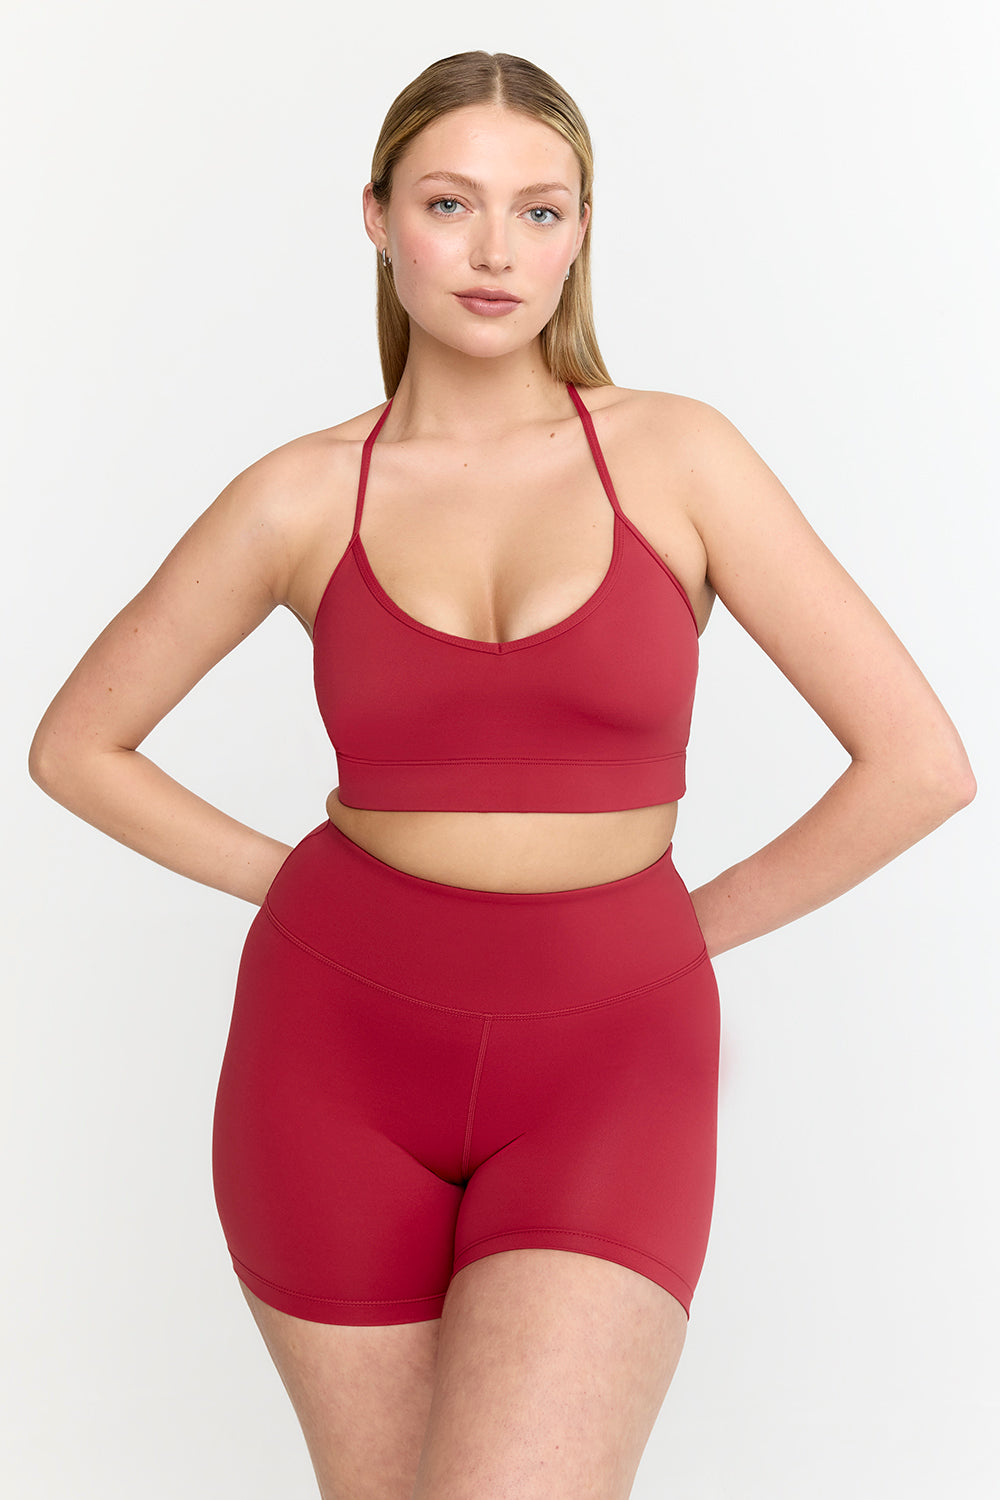 SKINLUXE MULTIWAY LIFT SPORTS BRA - RETRO RED – TALA